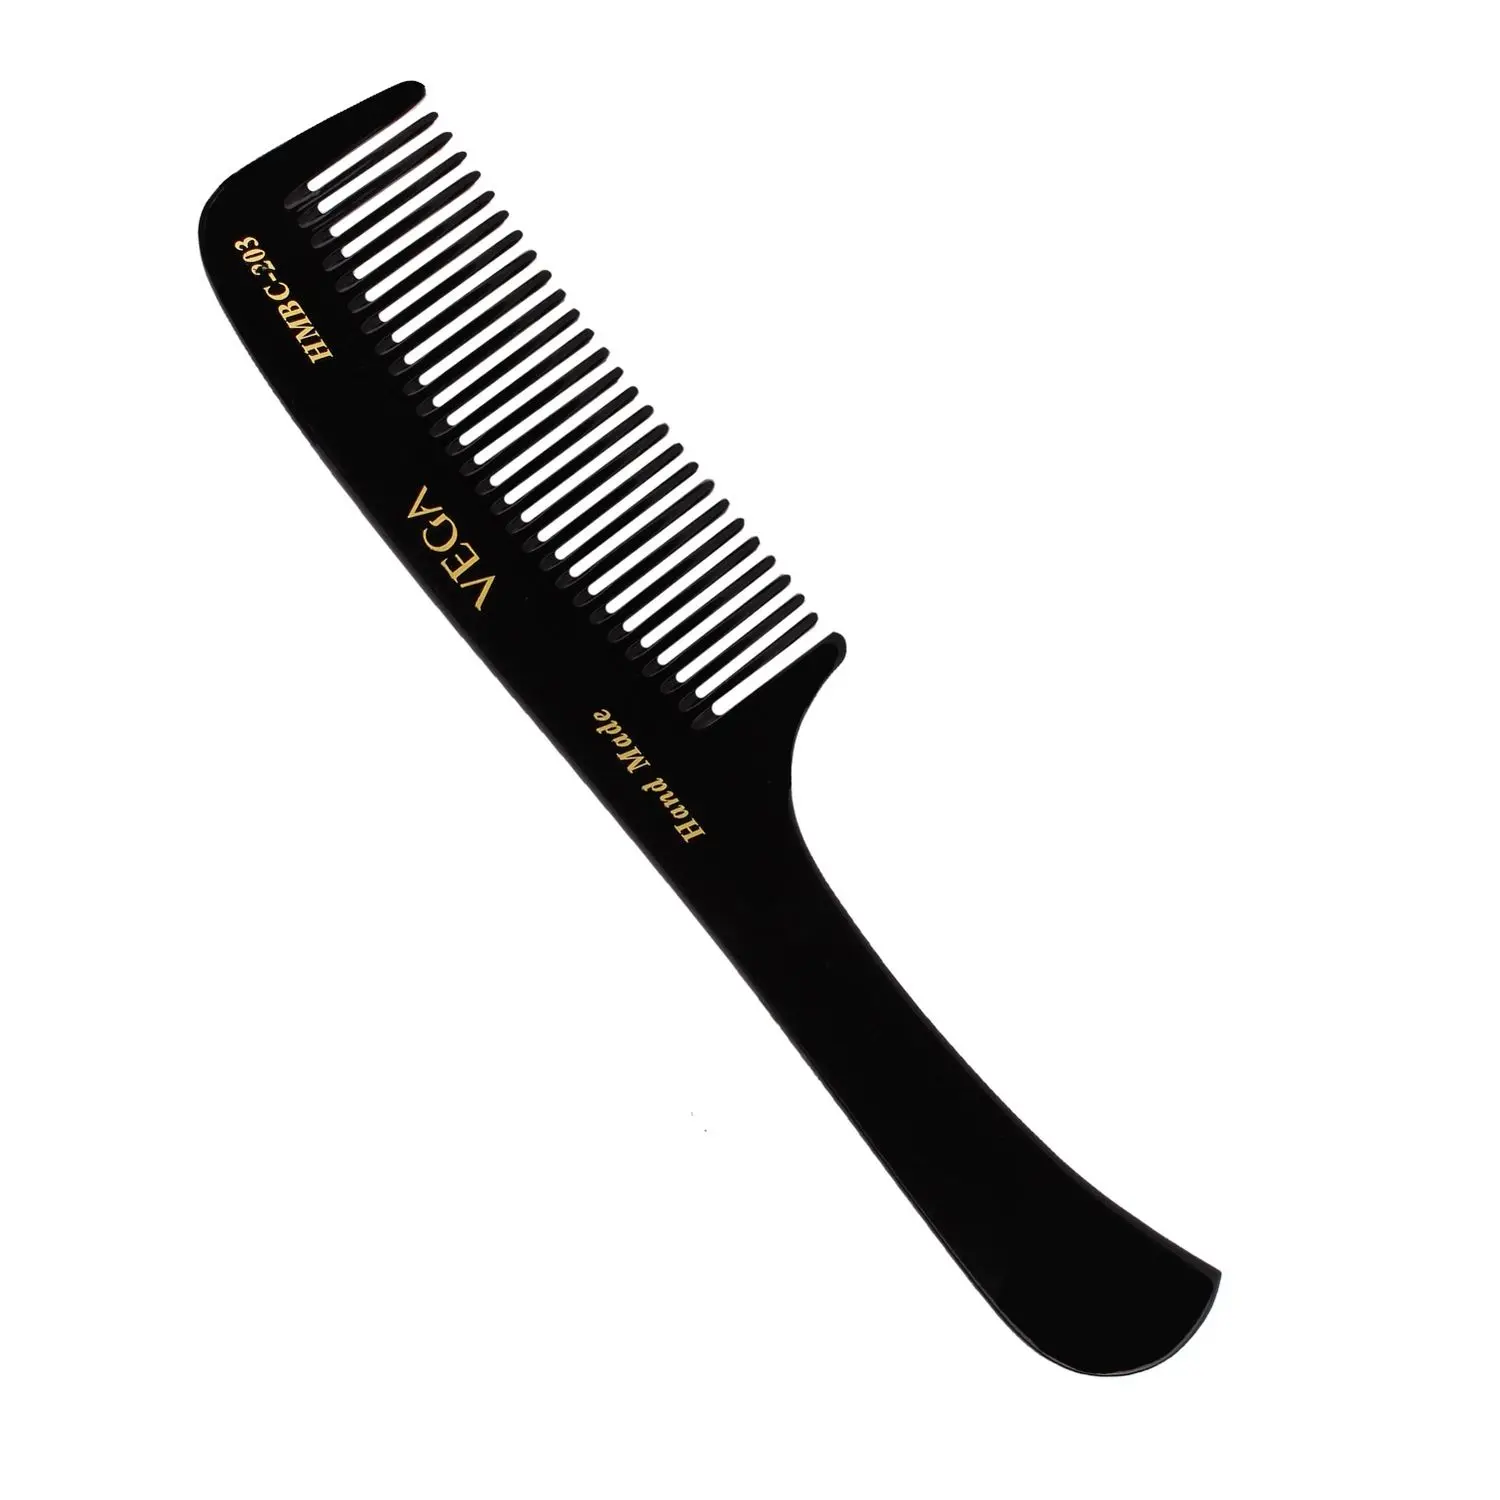 VEGA Handcrafted Grooming Hair Comb for Professional Styling, (HMBC-203)